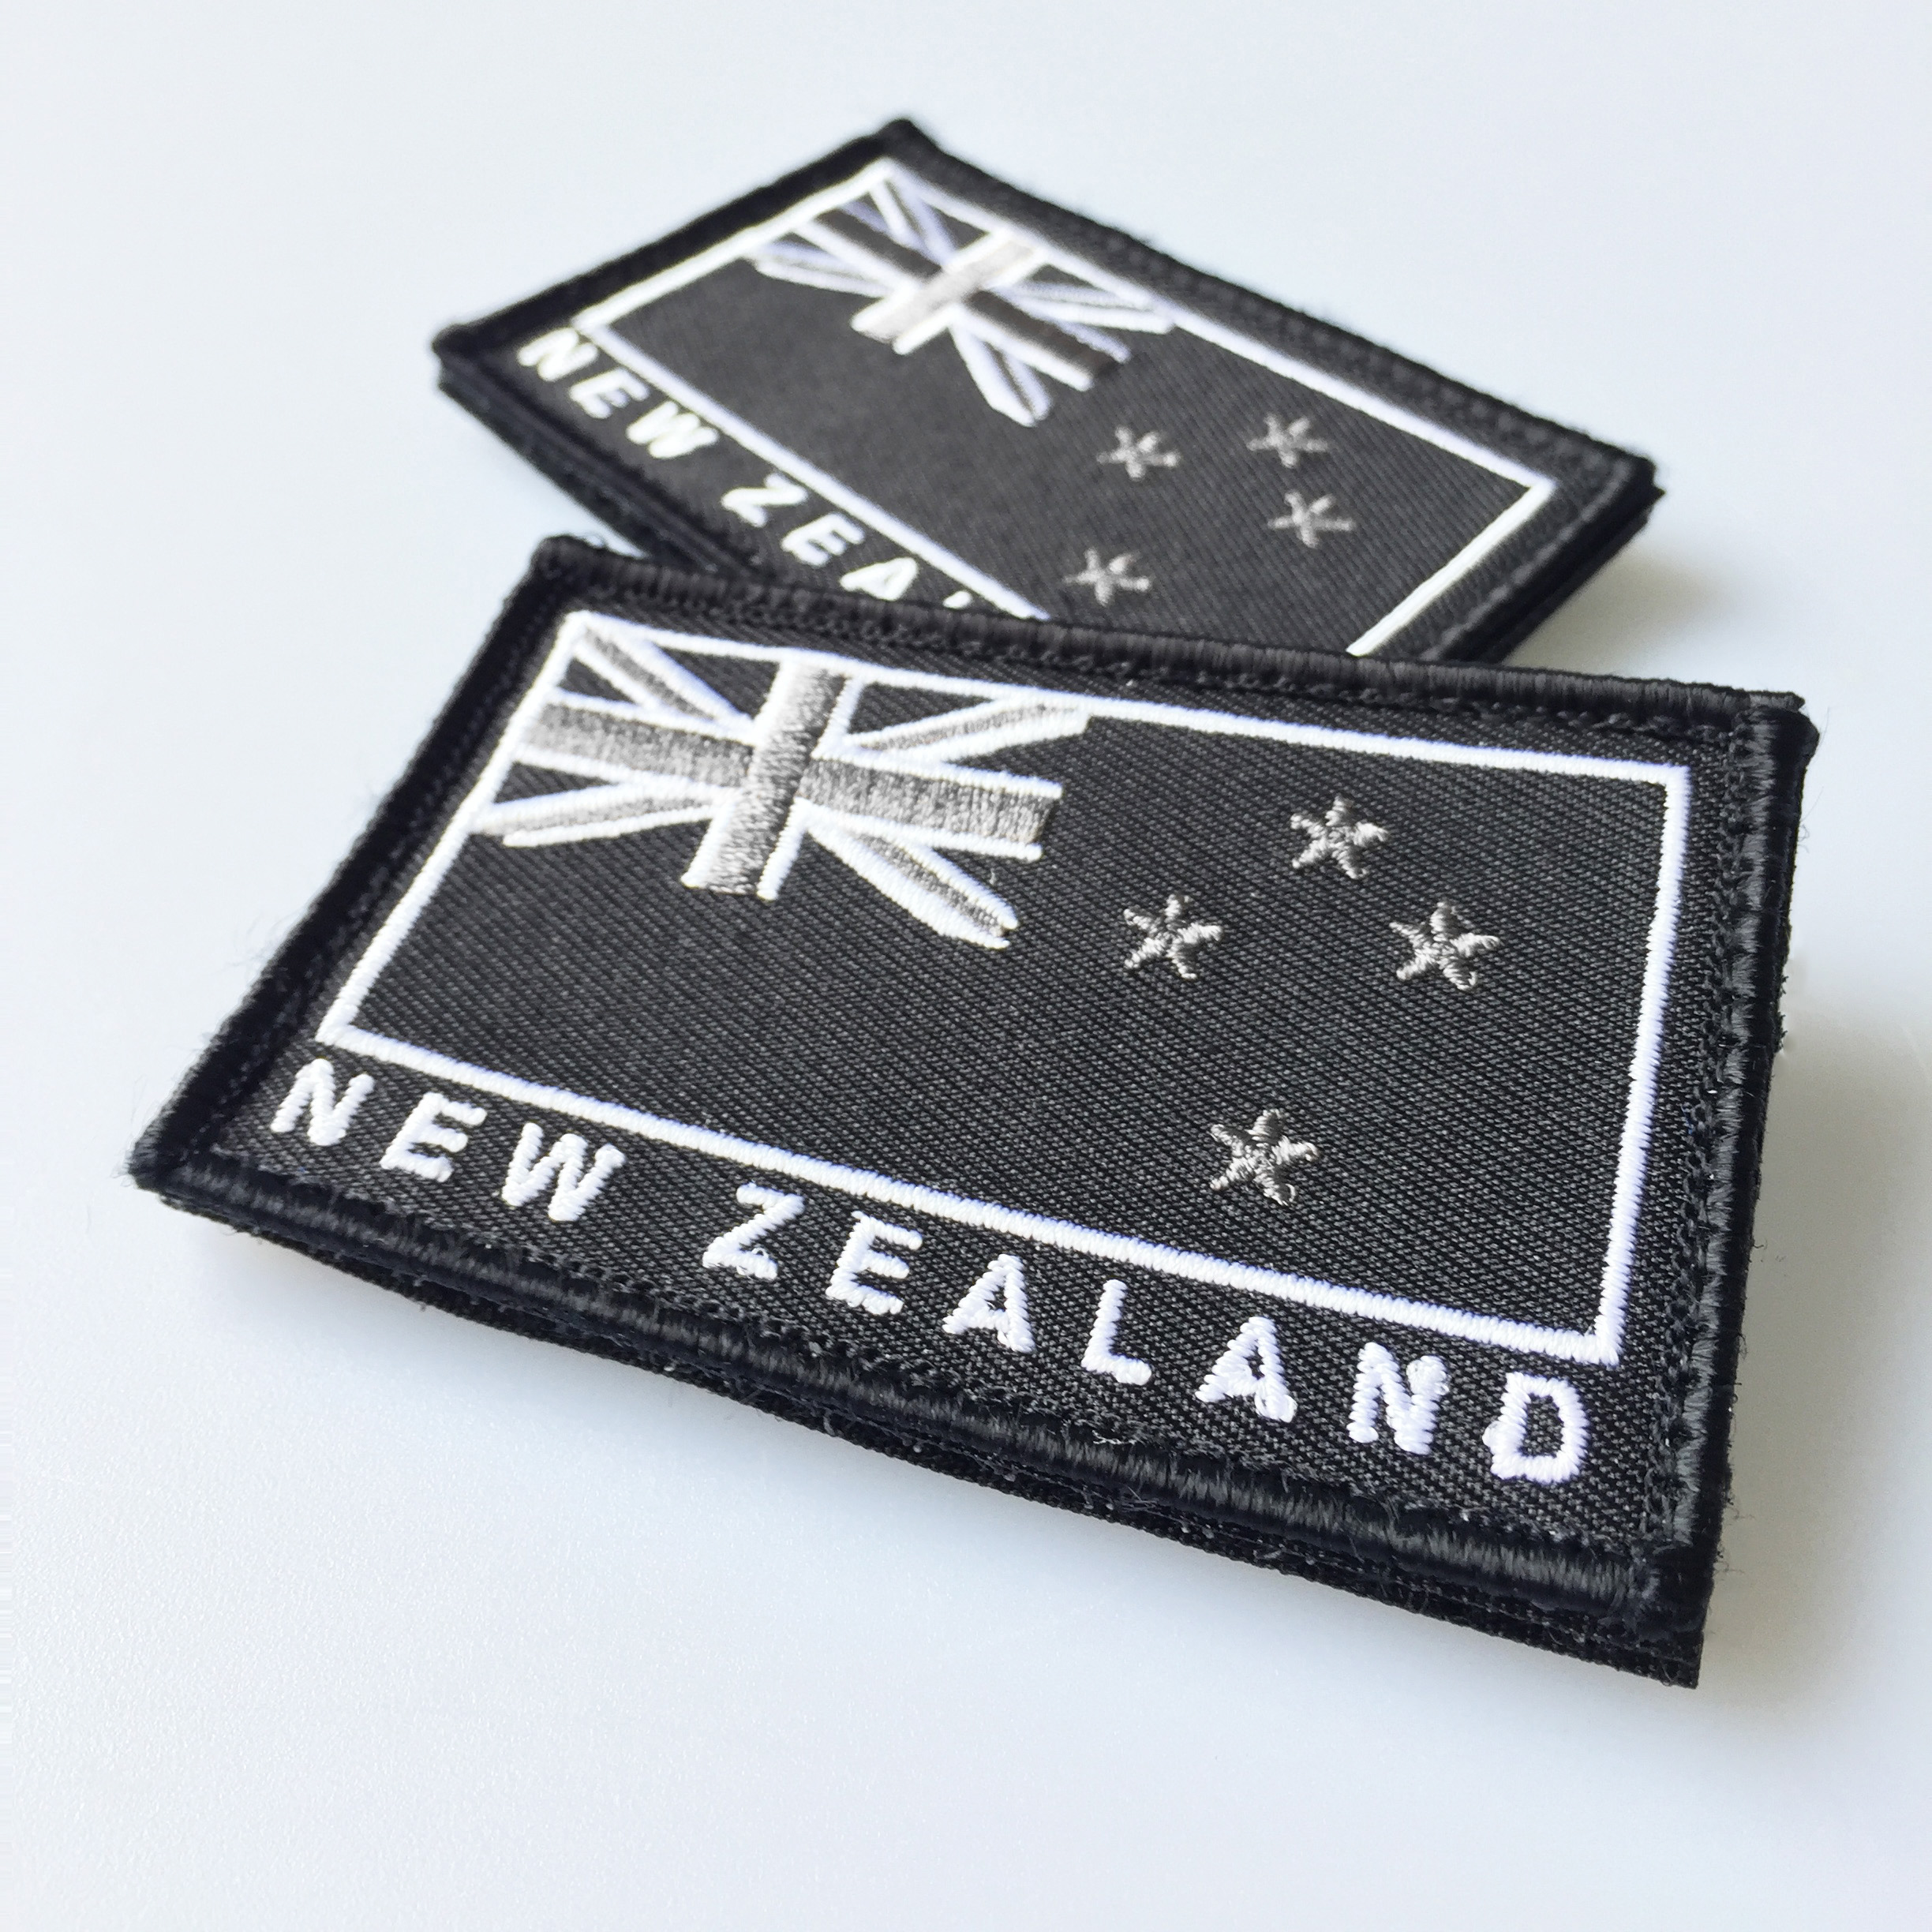 New Zealand flag patch grey. Best for darker colour and contrasted items.